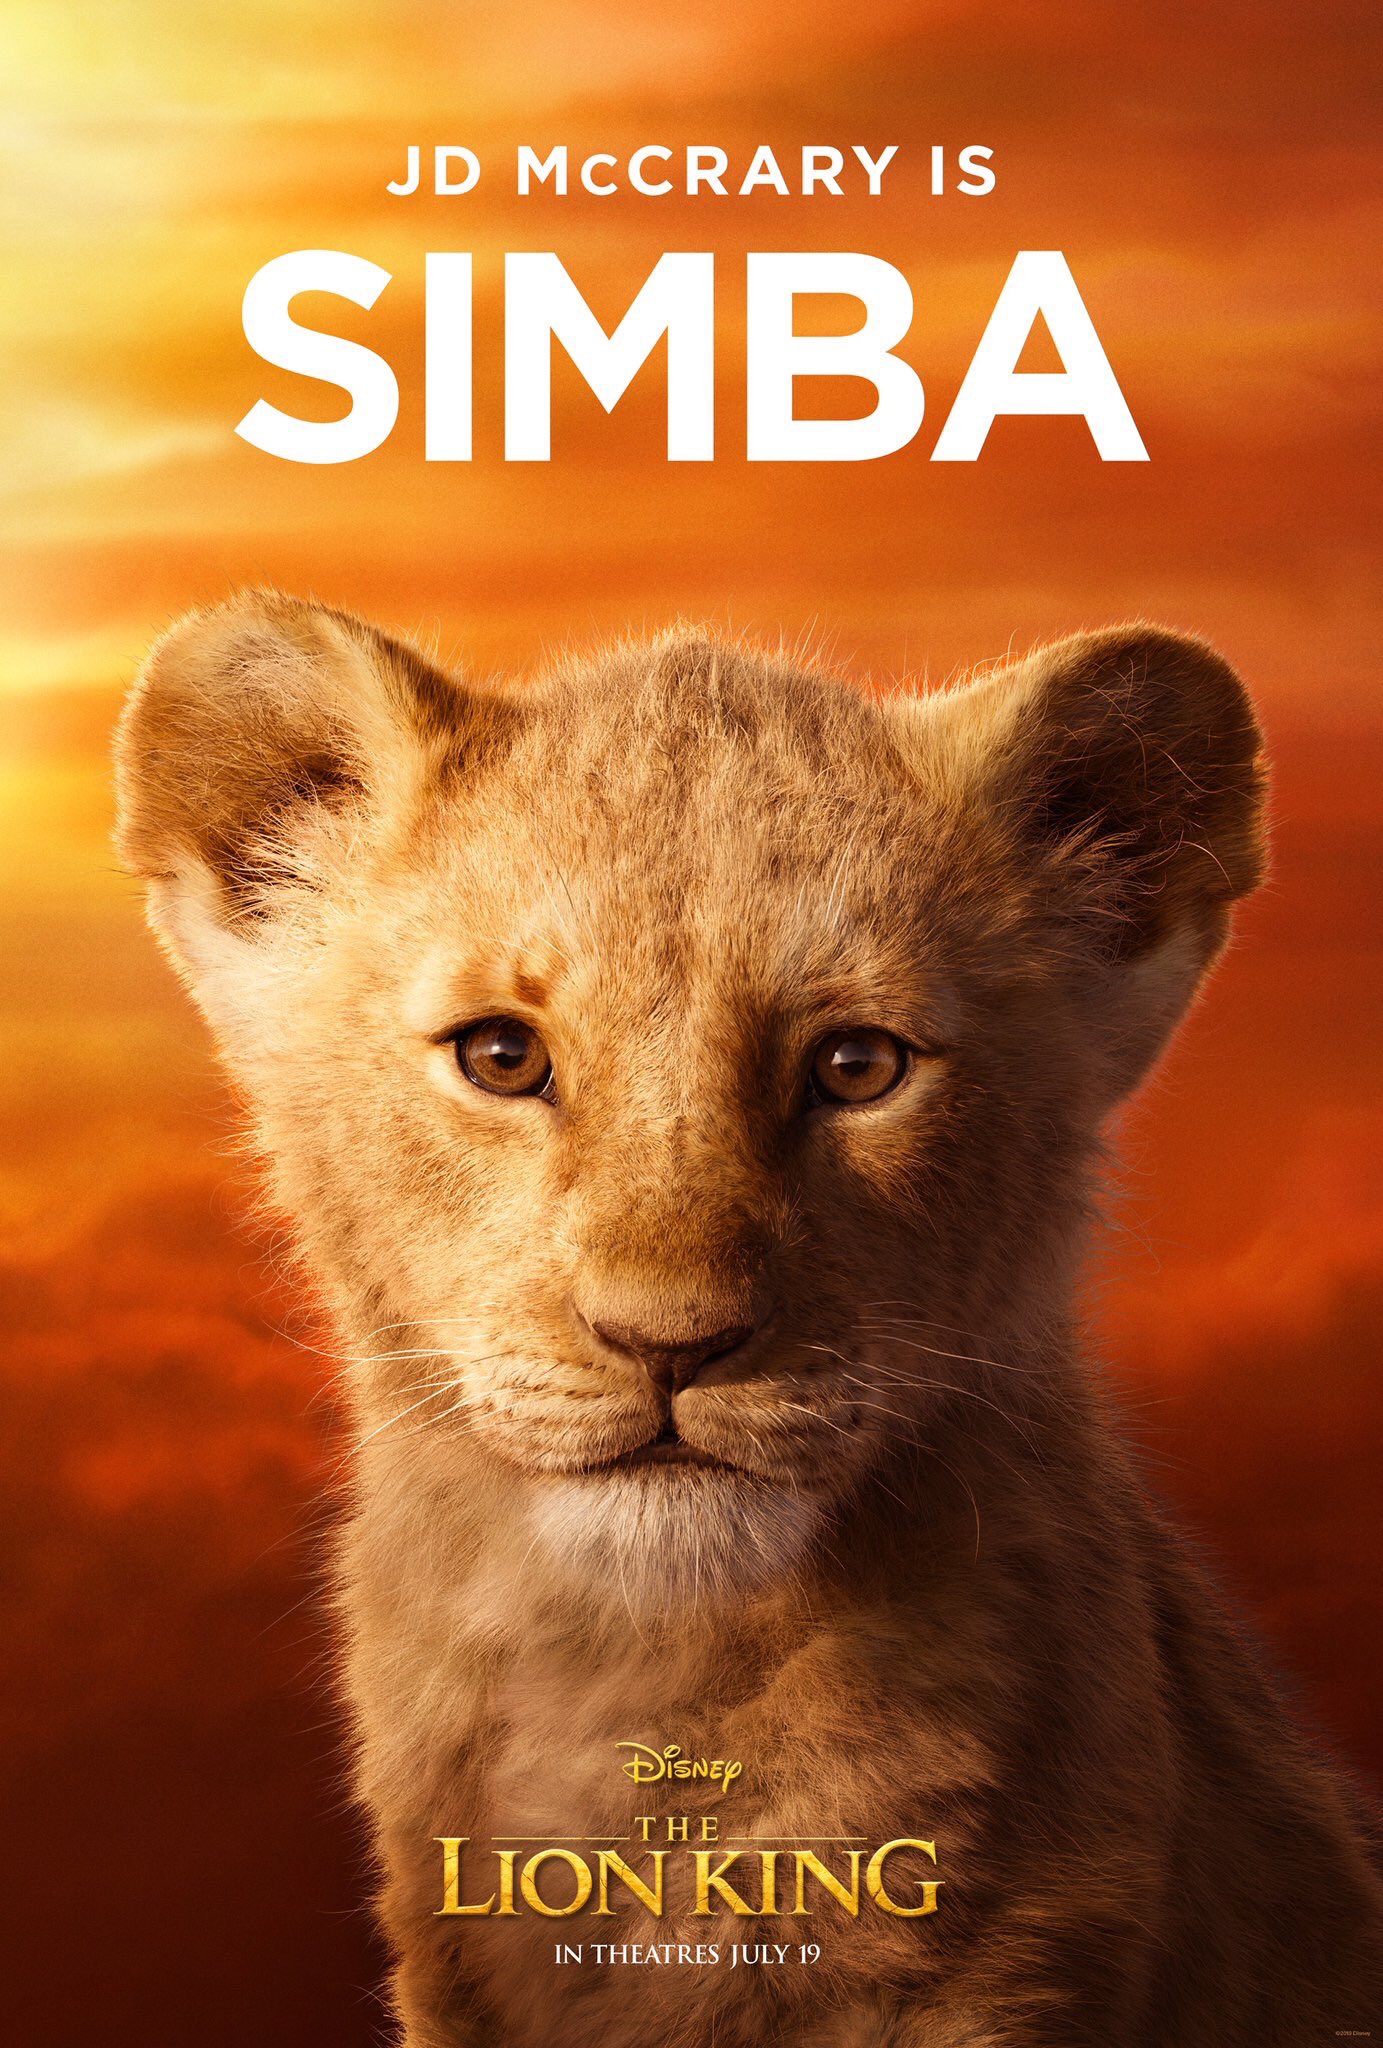 Discussingfilm New Character Posters For Young Simba Young Nala And Sarabi In The Lion King Have Been Officially Released Source Disney T Co Vbtcituznf Twitter